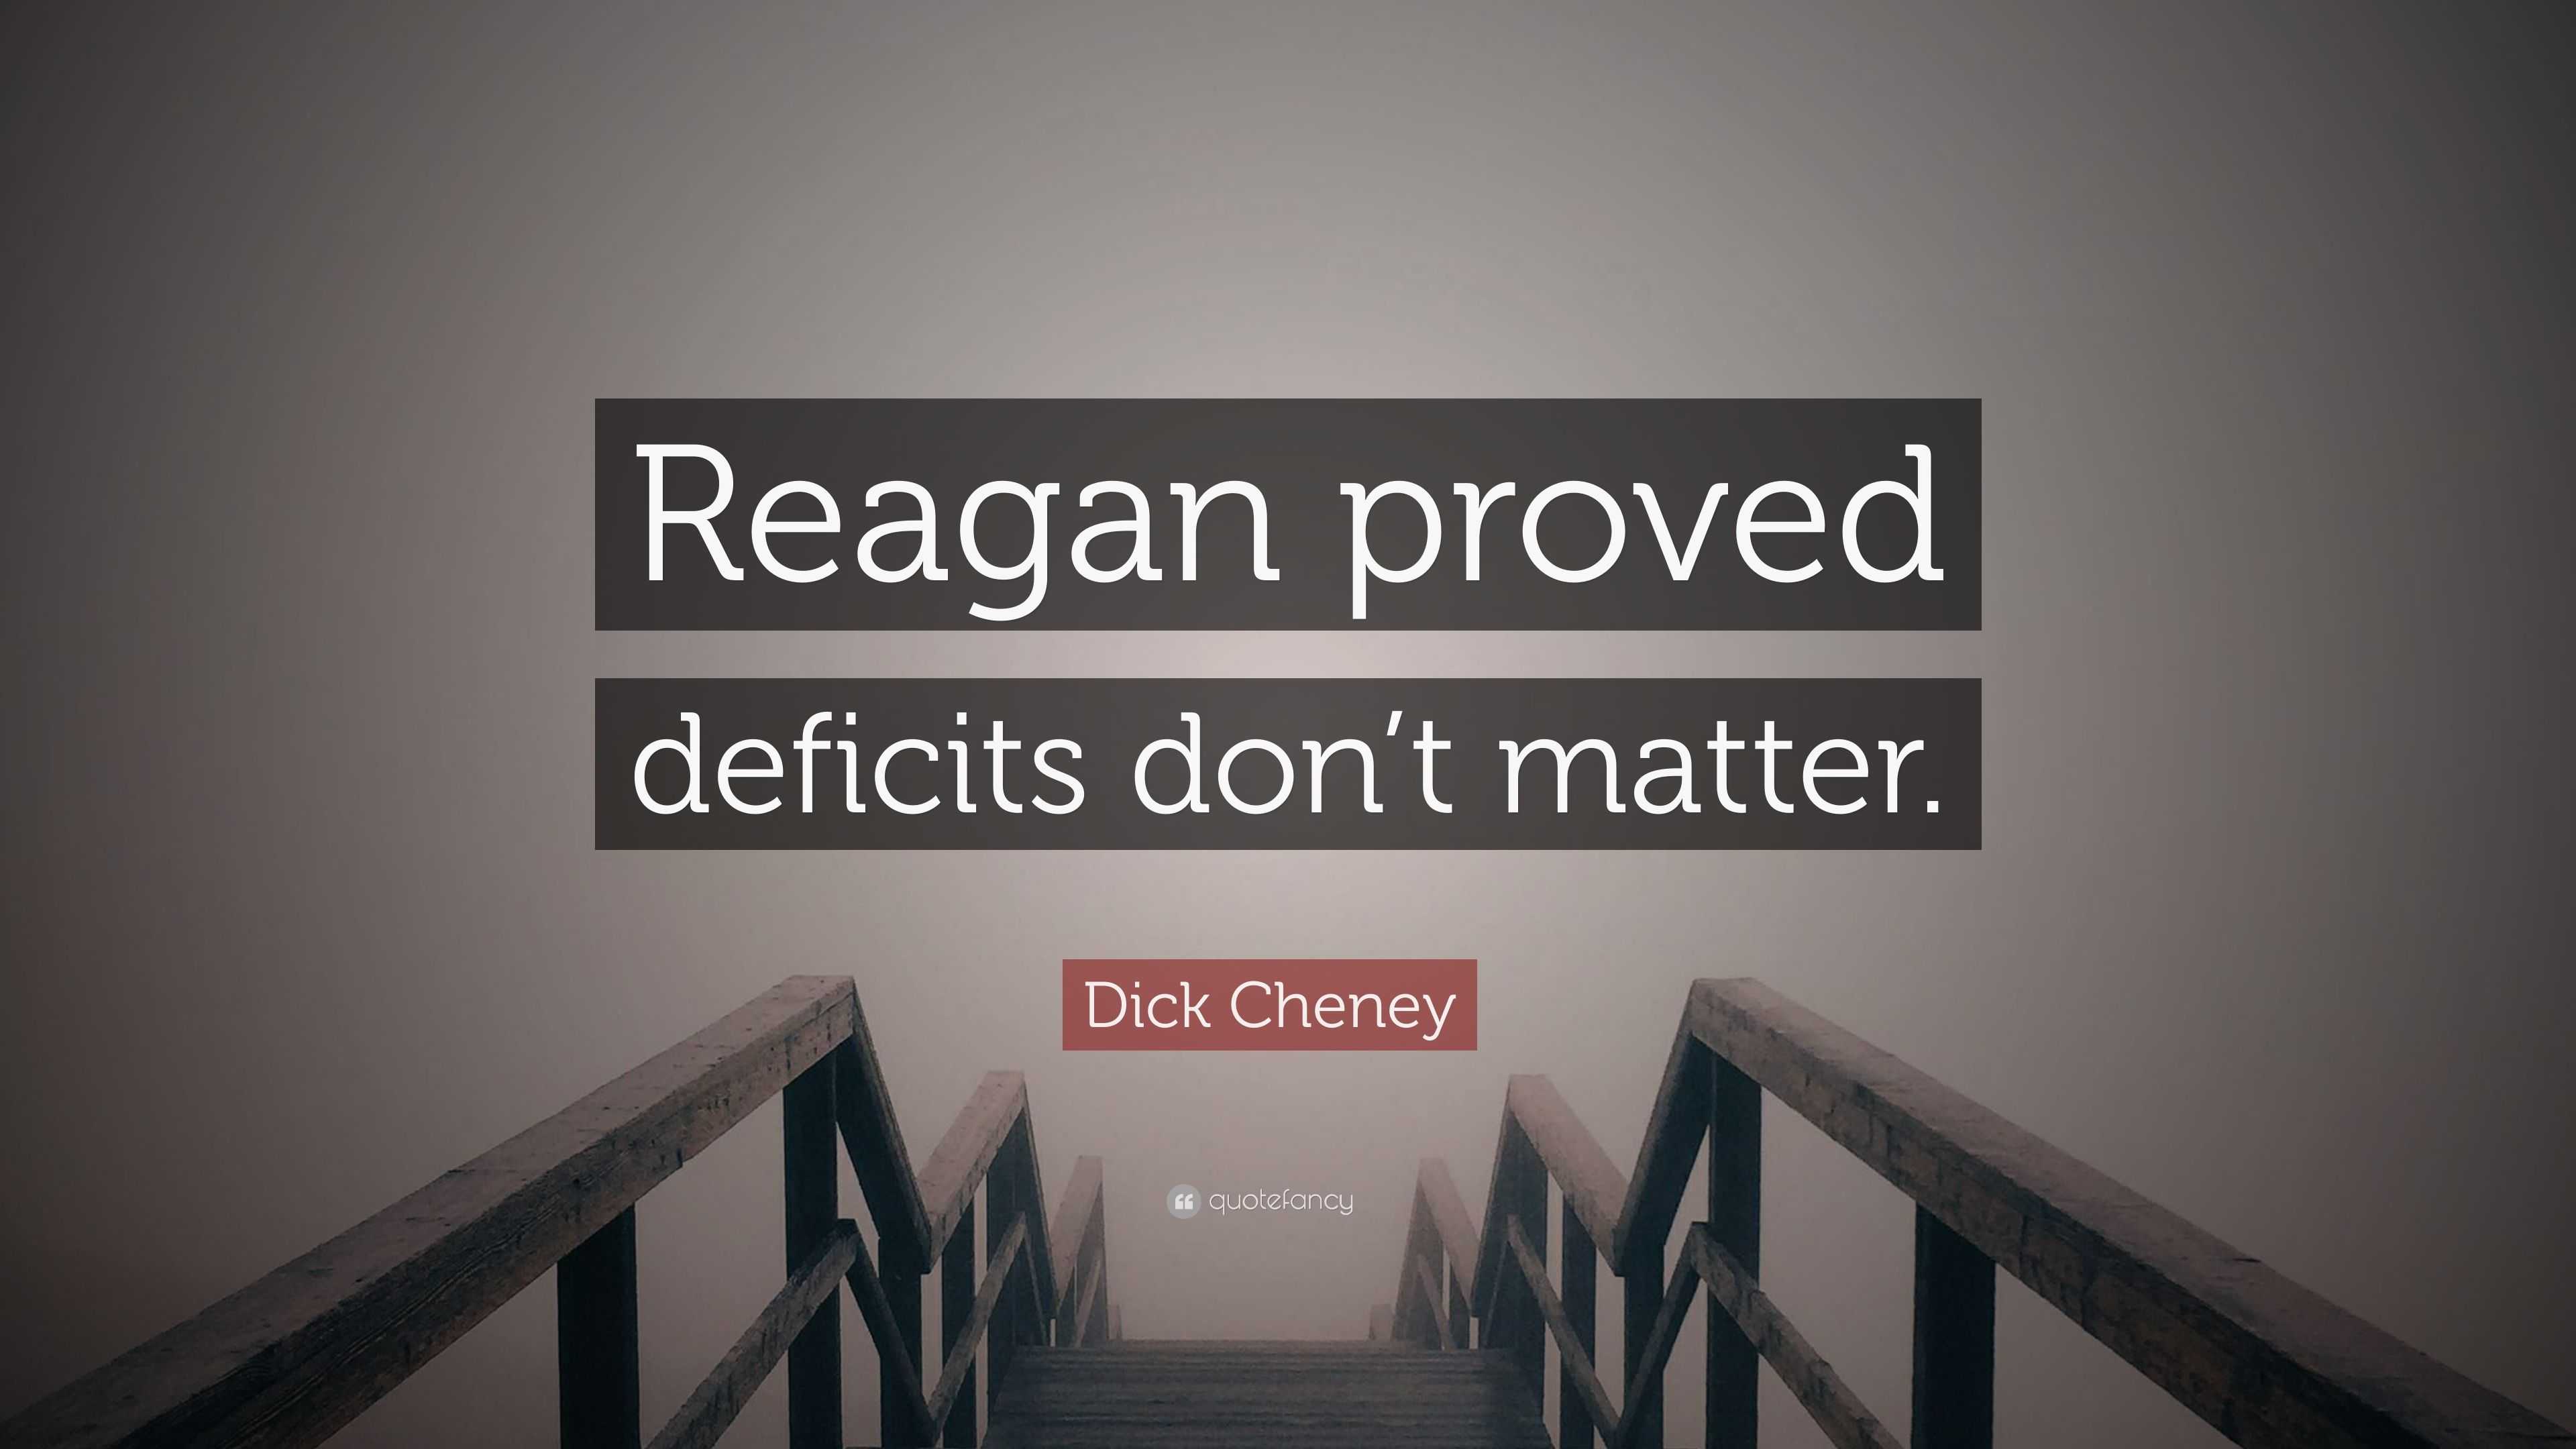 6103224-Dick-Cheney-Quote-Reagan-proved-deficits-don-t-matter.jpg